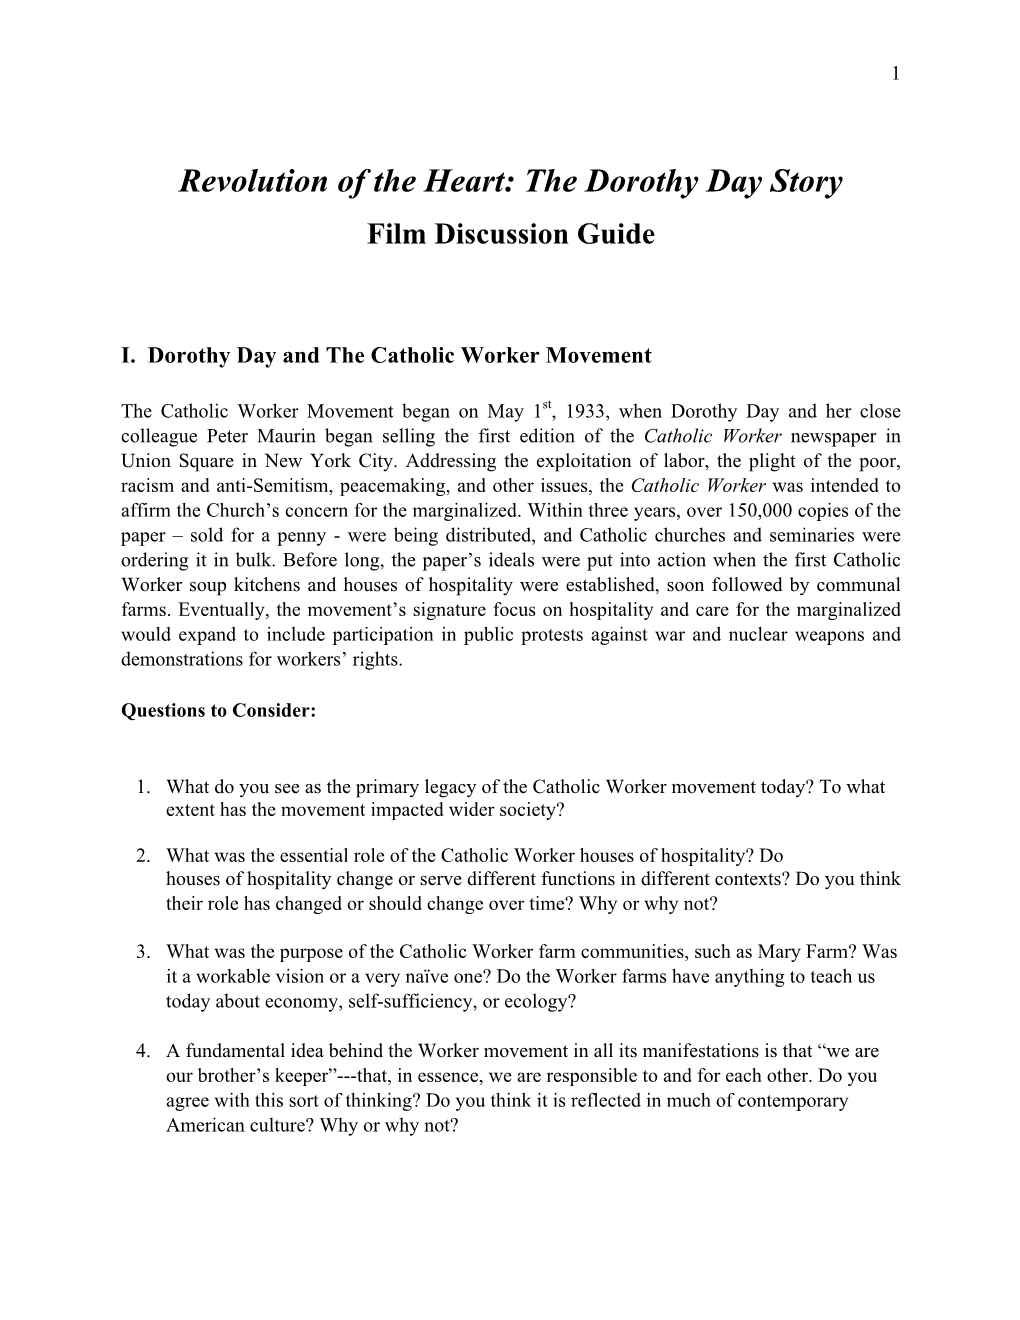 Revolution of the Heart: the Dorothy Day Story Film Discussion Guide